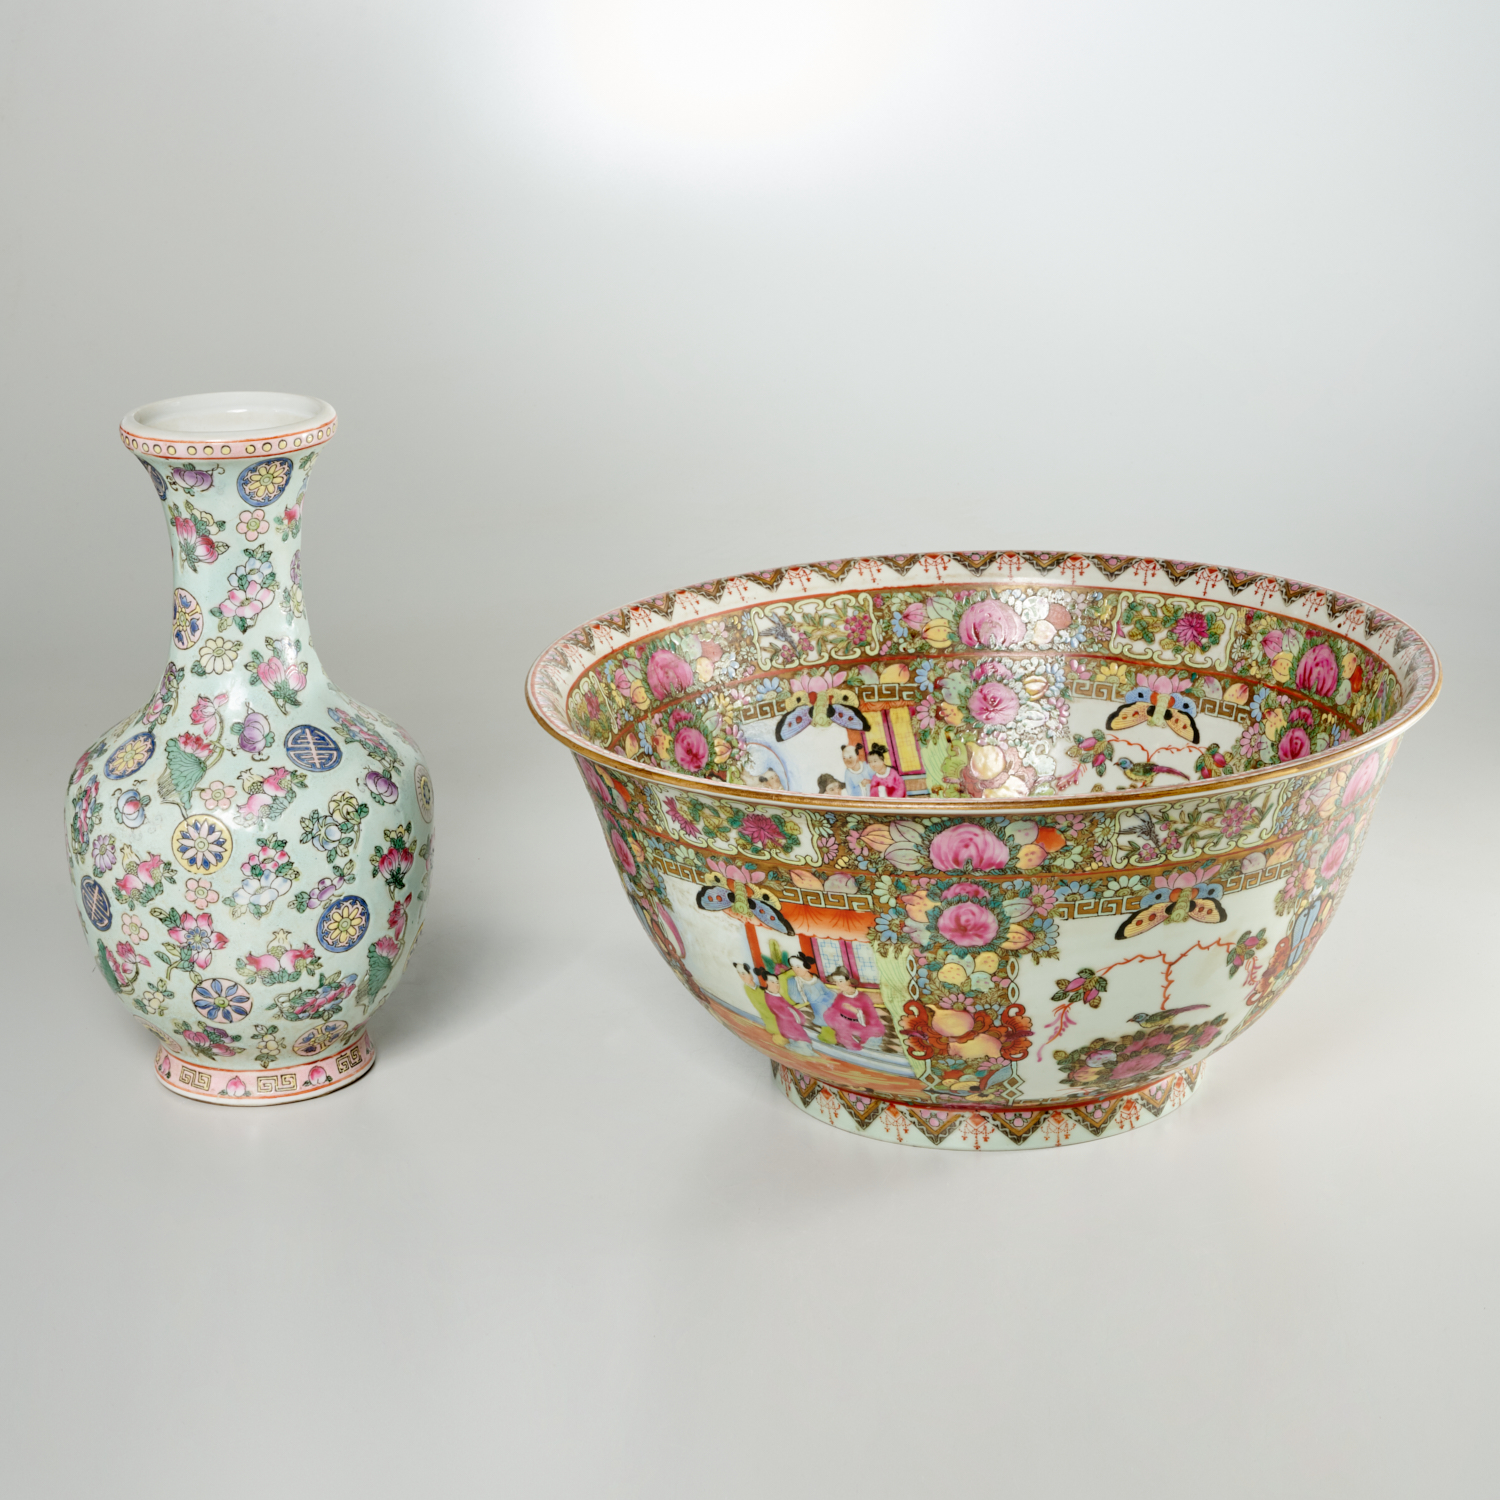 CHINESE PORCELAIN VASE AND CENTER